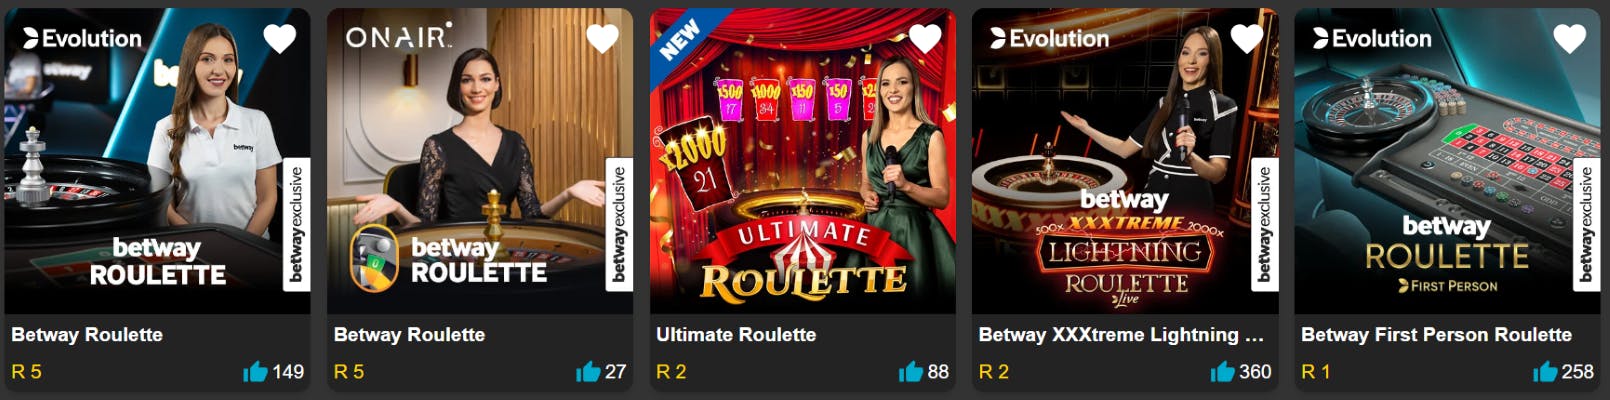 Betway SA Online Roulette Games